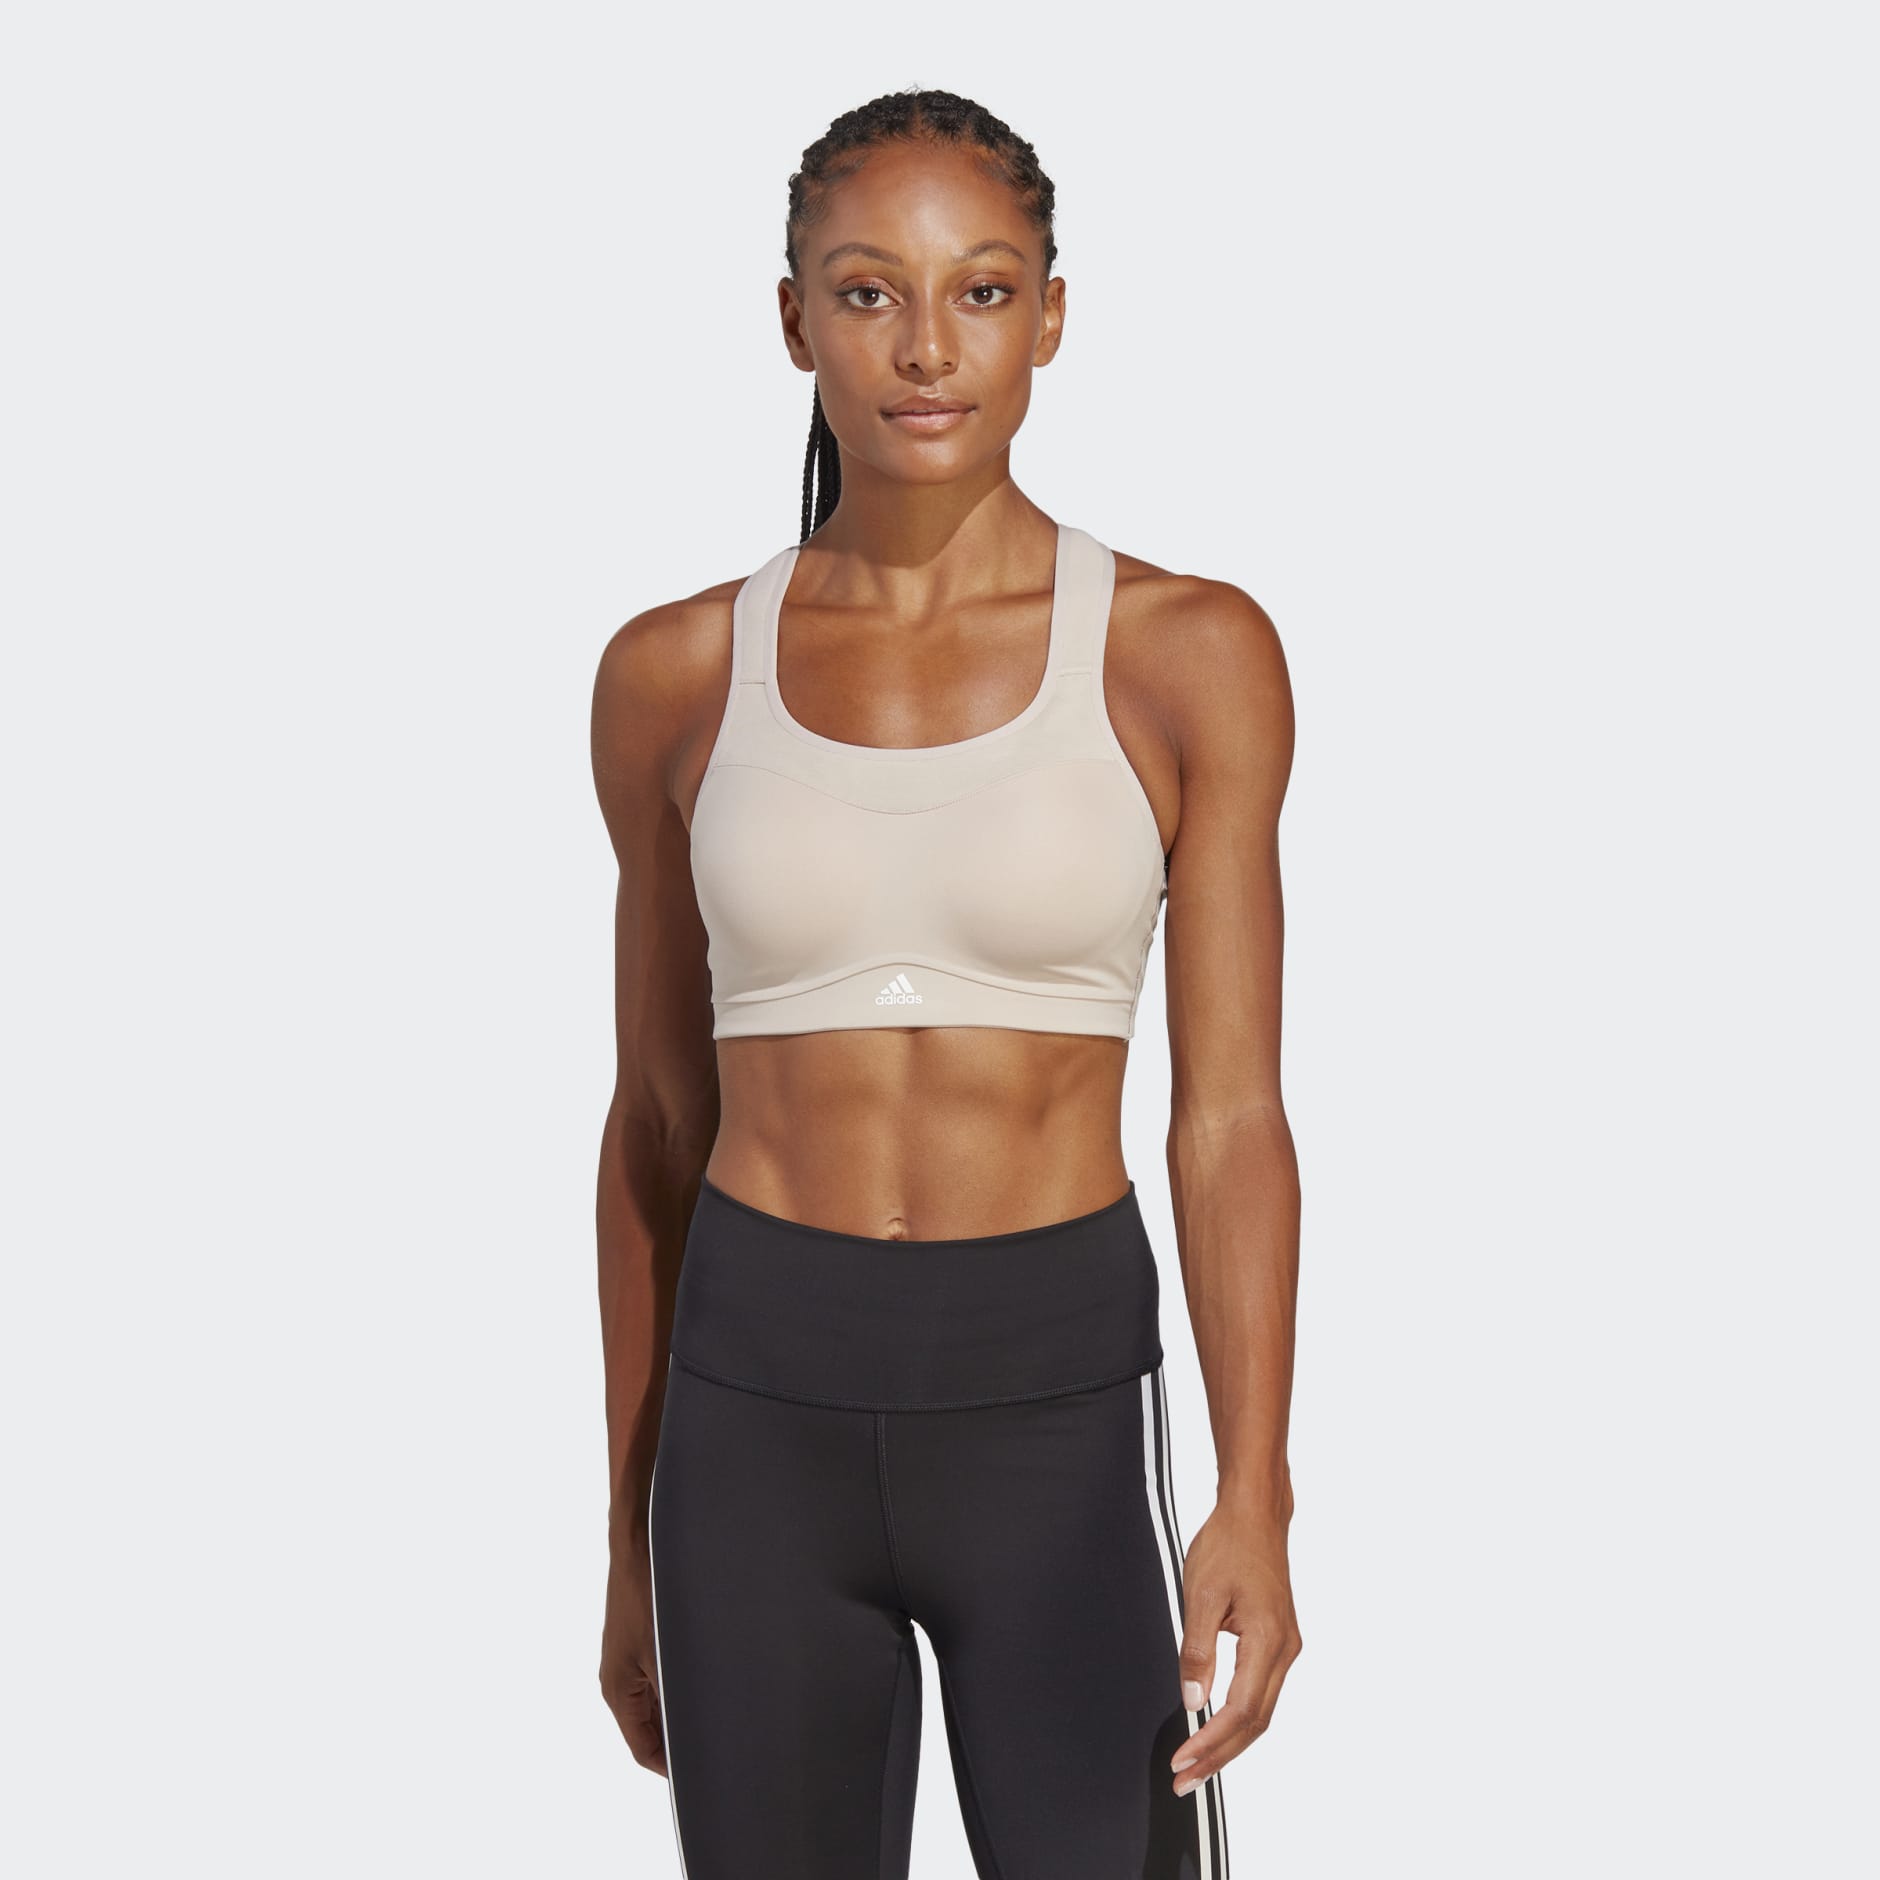 Women's Clothing - adidas TLRD Impact Training High-Support Bra - Brown